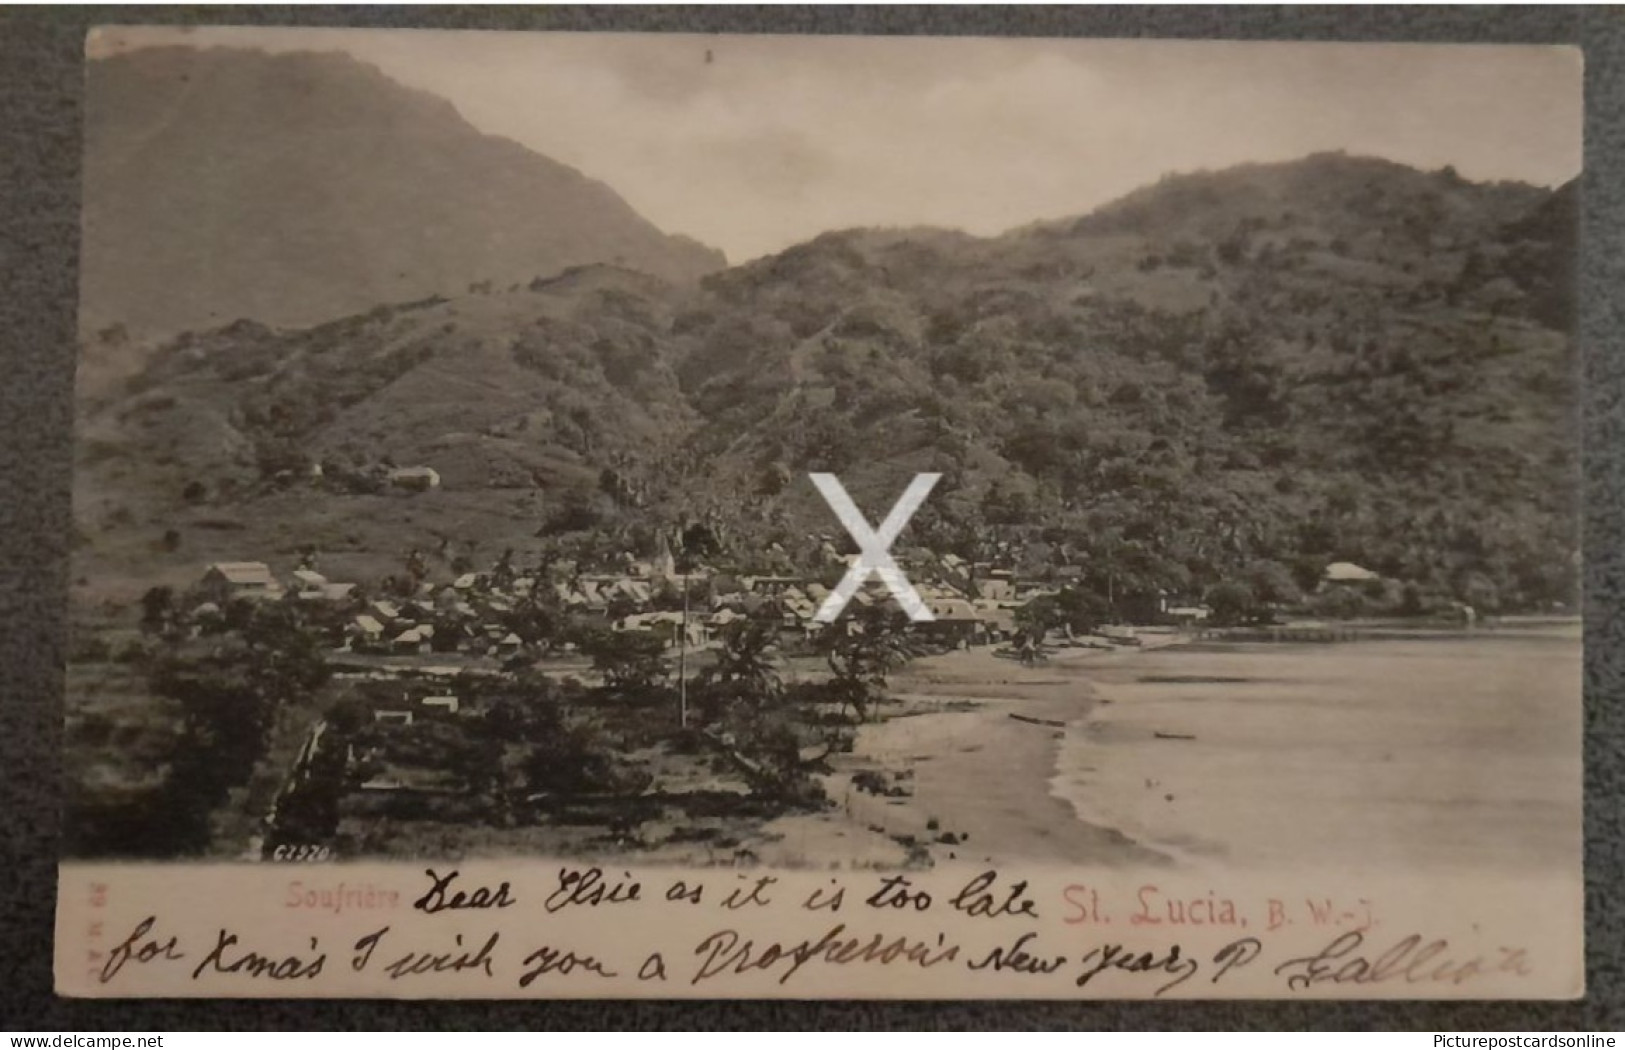 ST LUCIA SOUFRIERE NICE OLD B/W POSTCARD ANTILLES AMERICA POSTED TO GUERNSEY - Santa Lucia